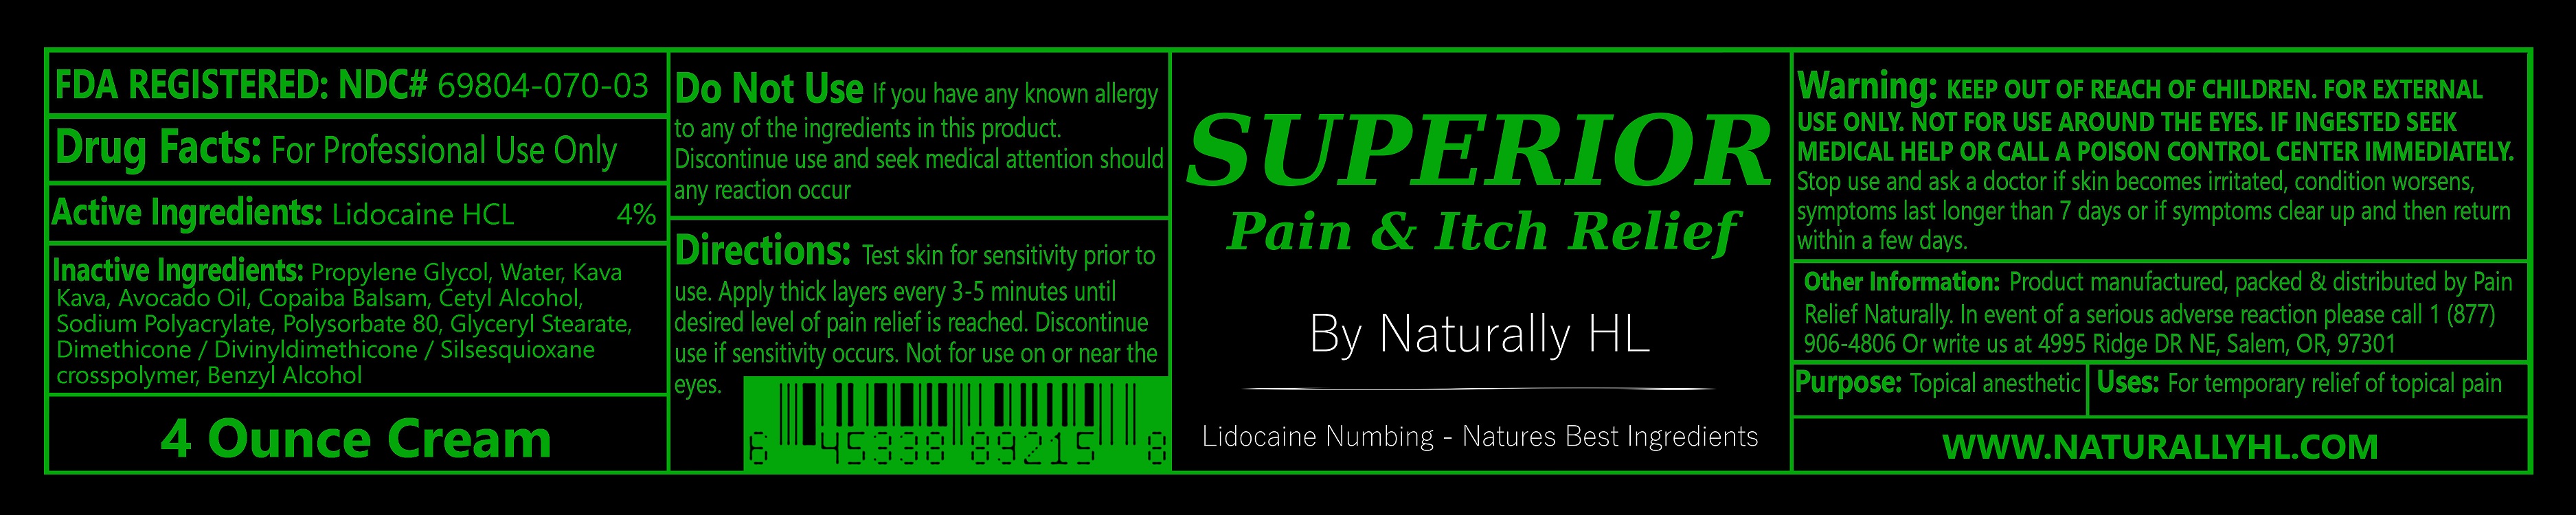 Superior Pain And Itch Relief | Lidocaine Hcl Cream while Breastfeeding